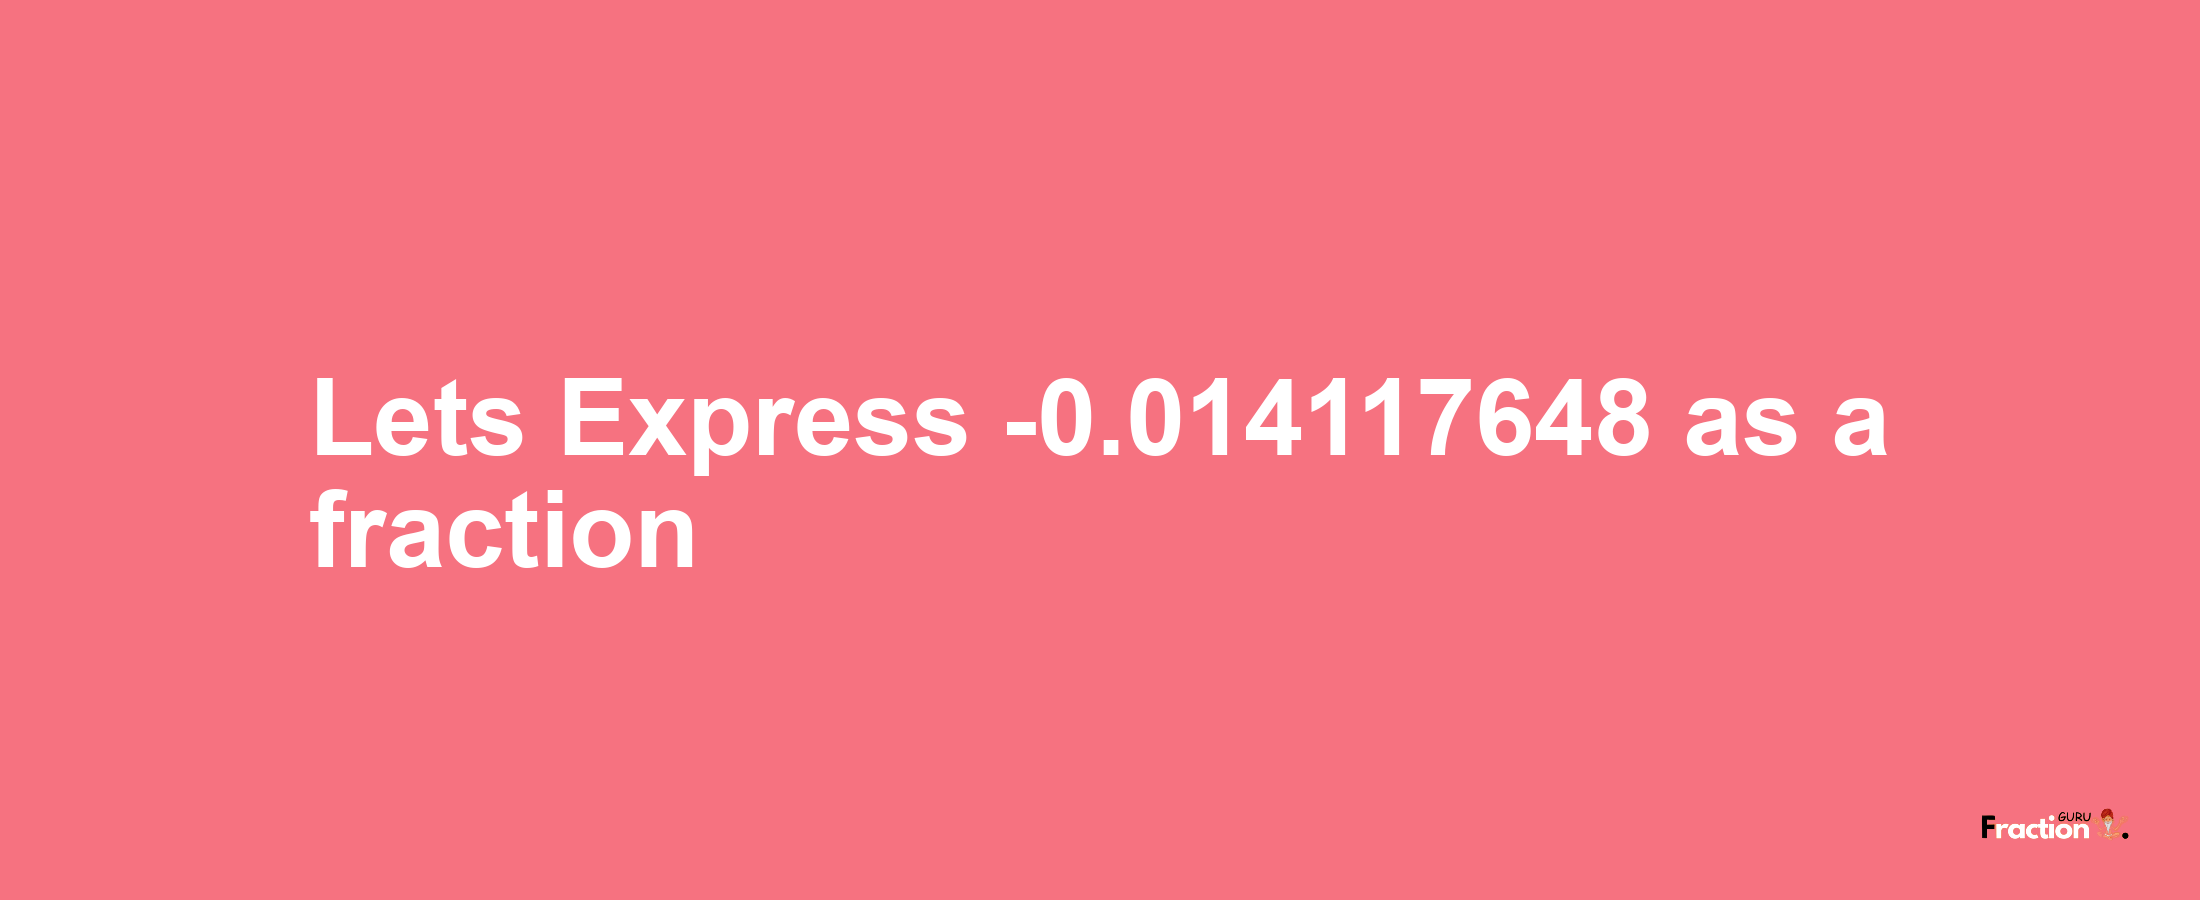 Lets Express -0.014117648 as afraction